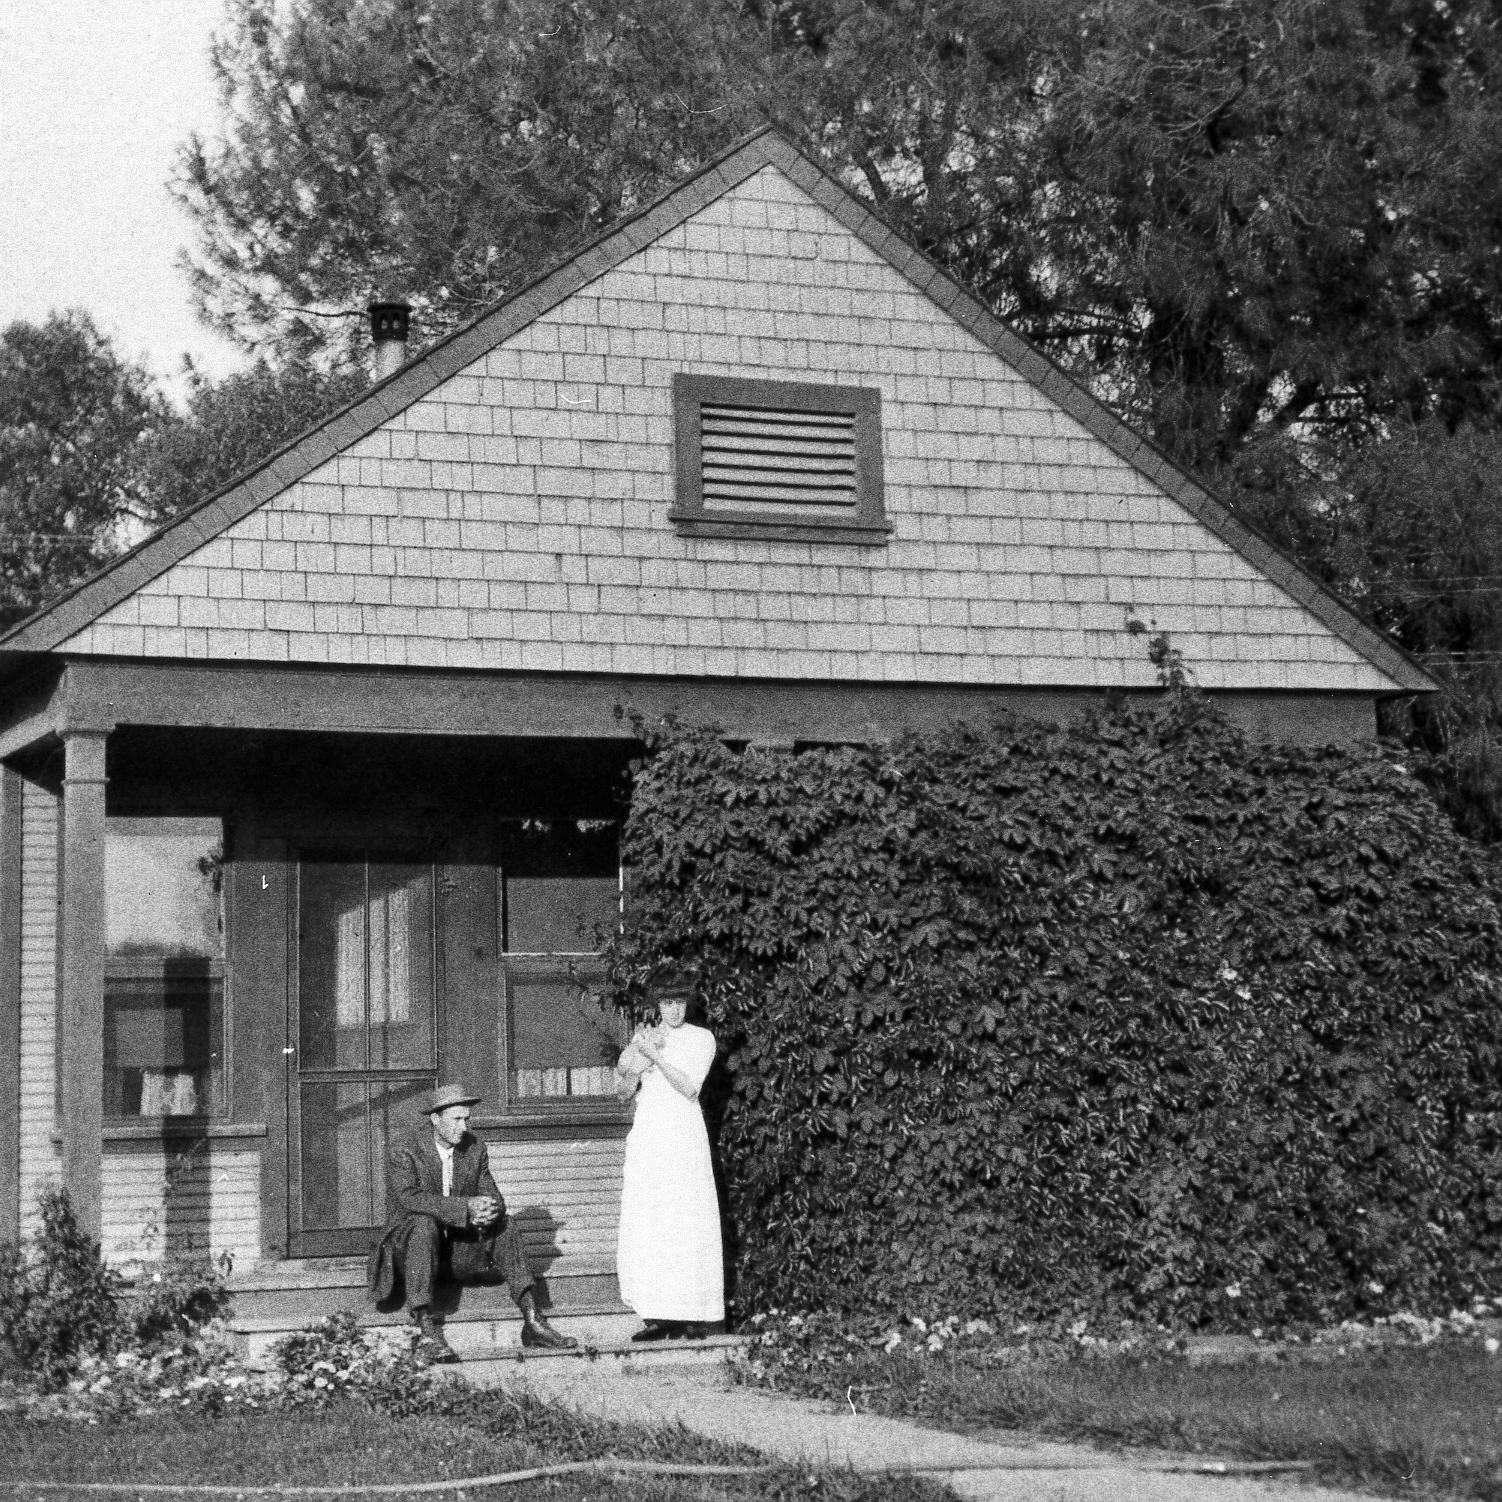 Honeymooners R.G. and Anda Smith at their first home, a Natoma Company employee house, 1912.